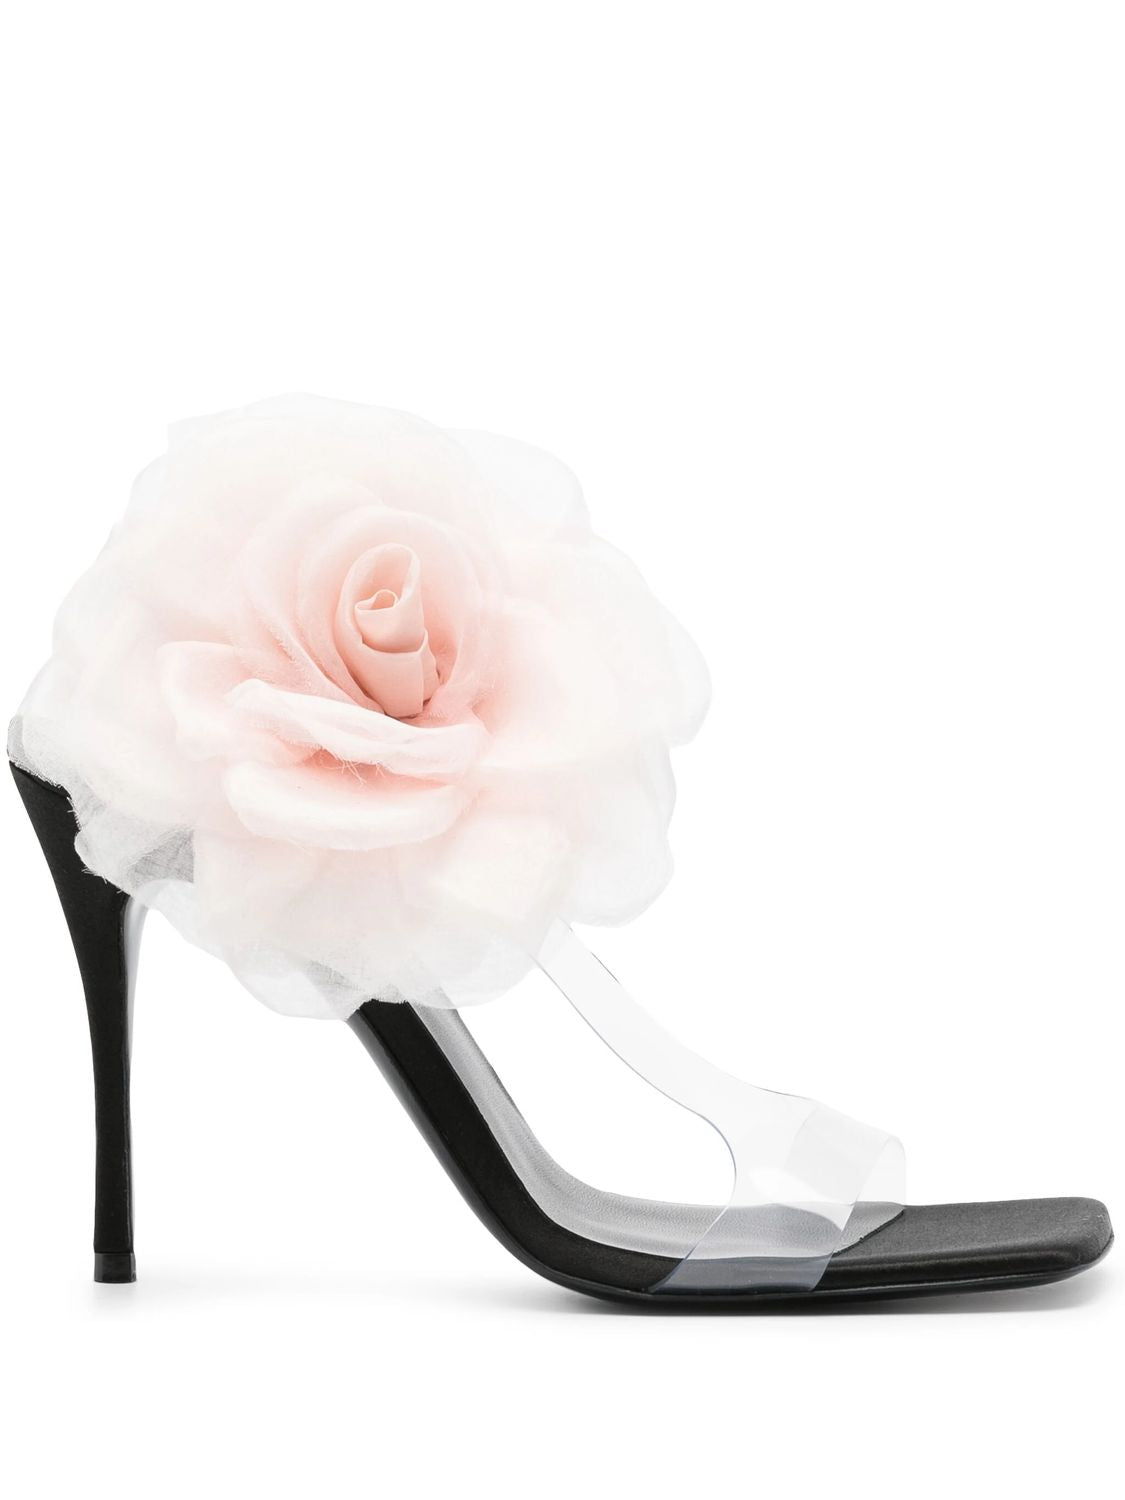 MAGDA BUTRYM Black Floral-Appliqué Sandals with 105mm Stiletto Heel - SS24 Collection